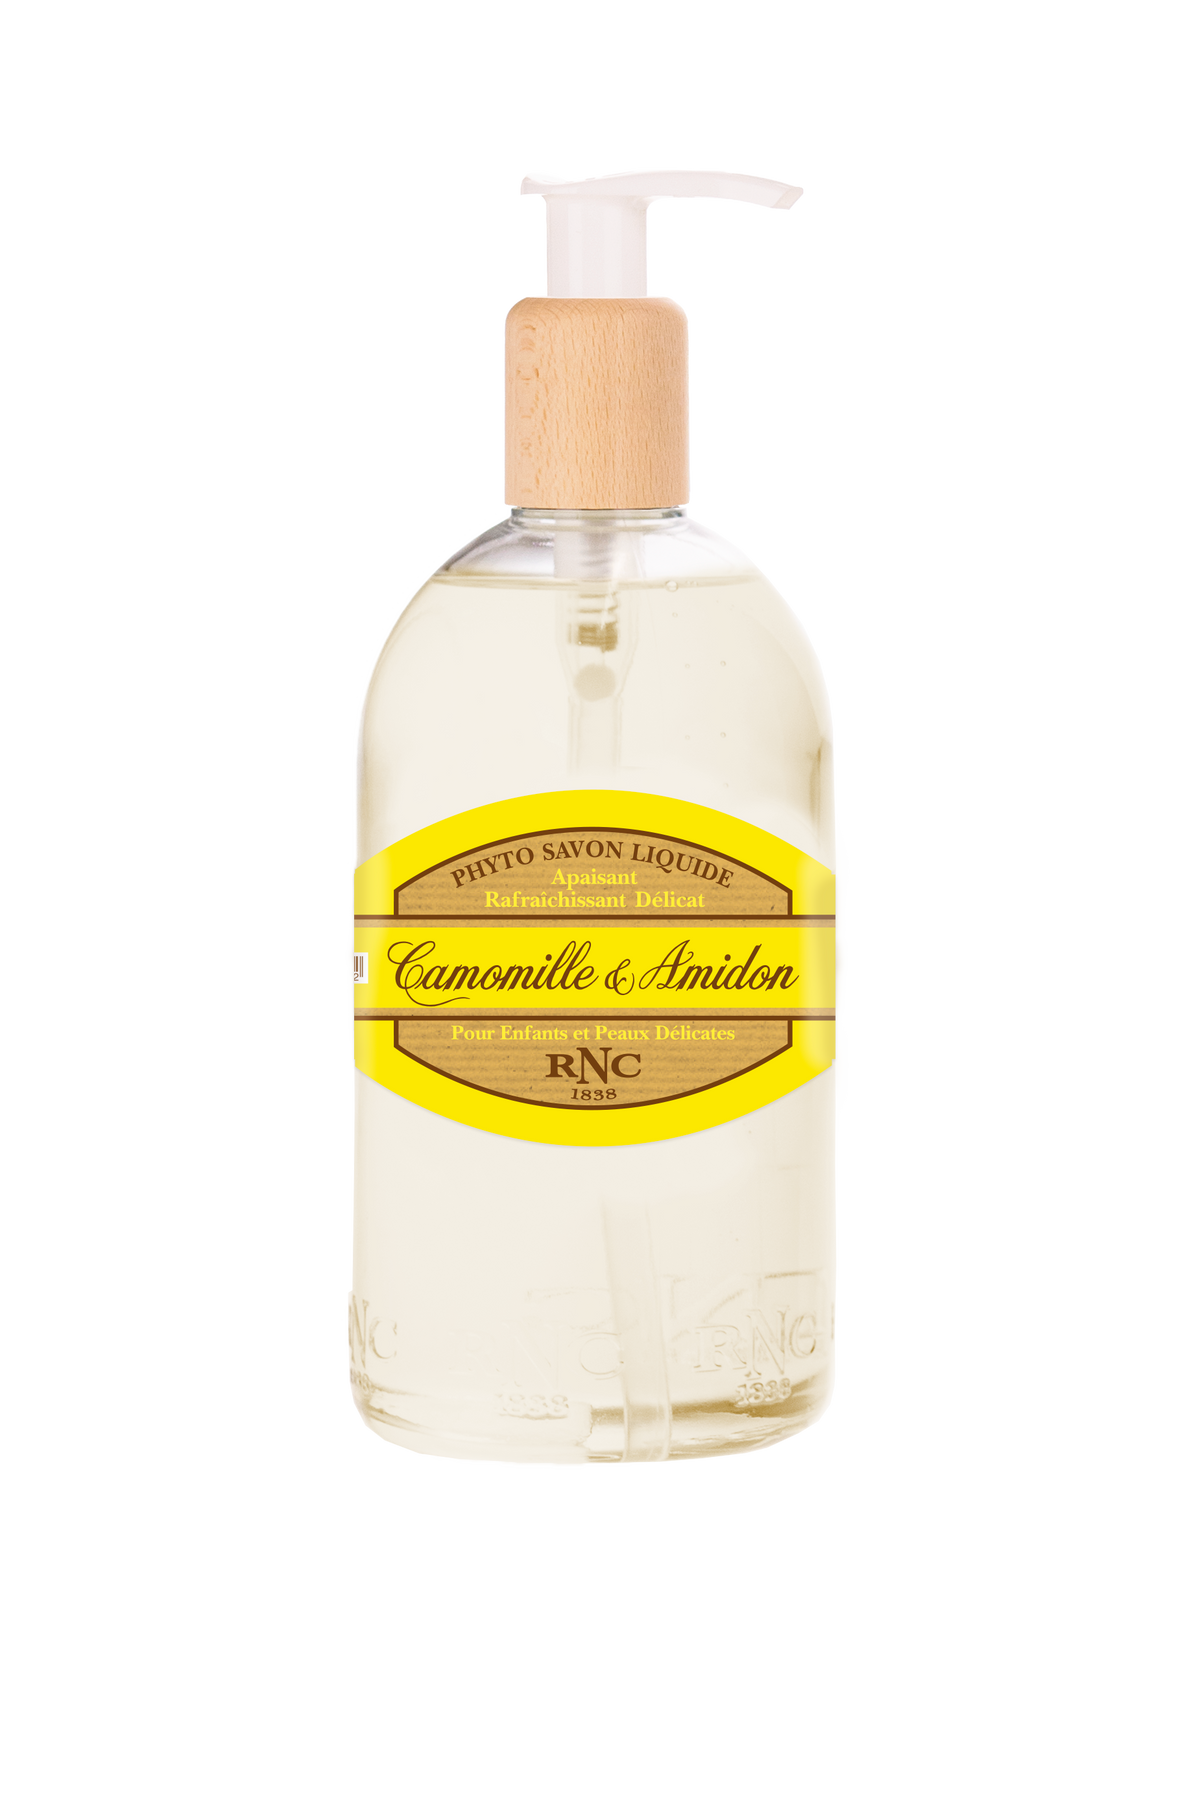 Rancé gentle soap bottle with a pump, labeled "pivto savon liquide" and "camomille & amandon" in French, indicating chamomile and almond ingredients.